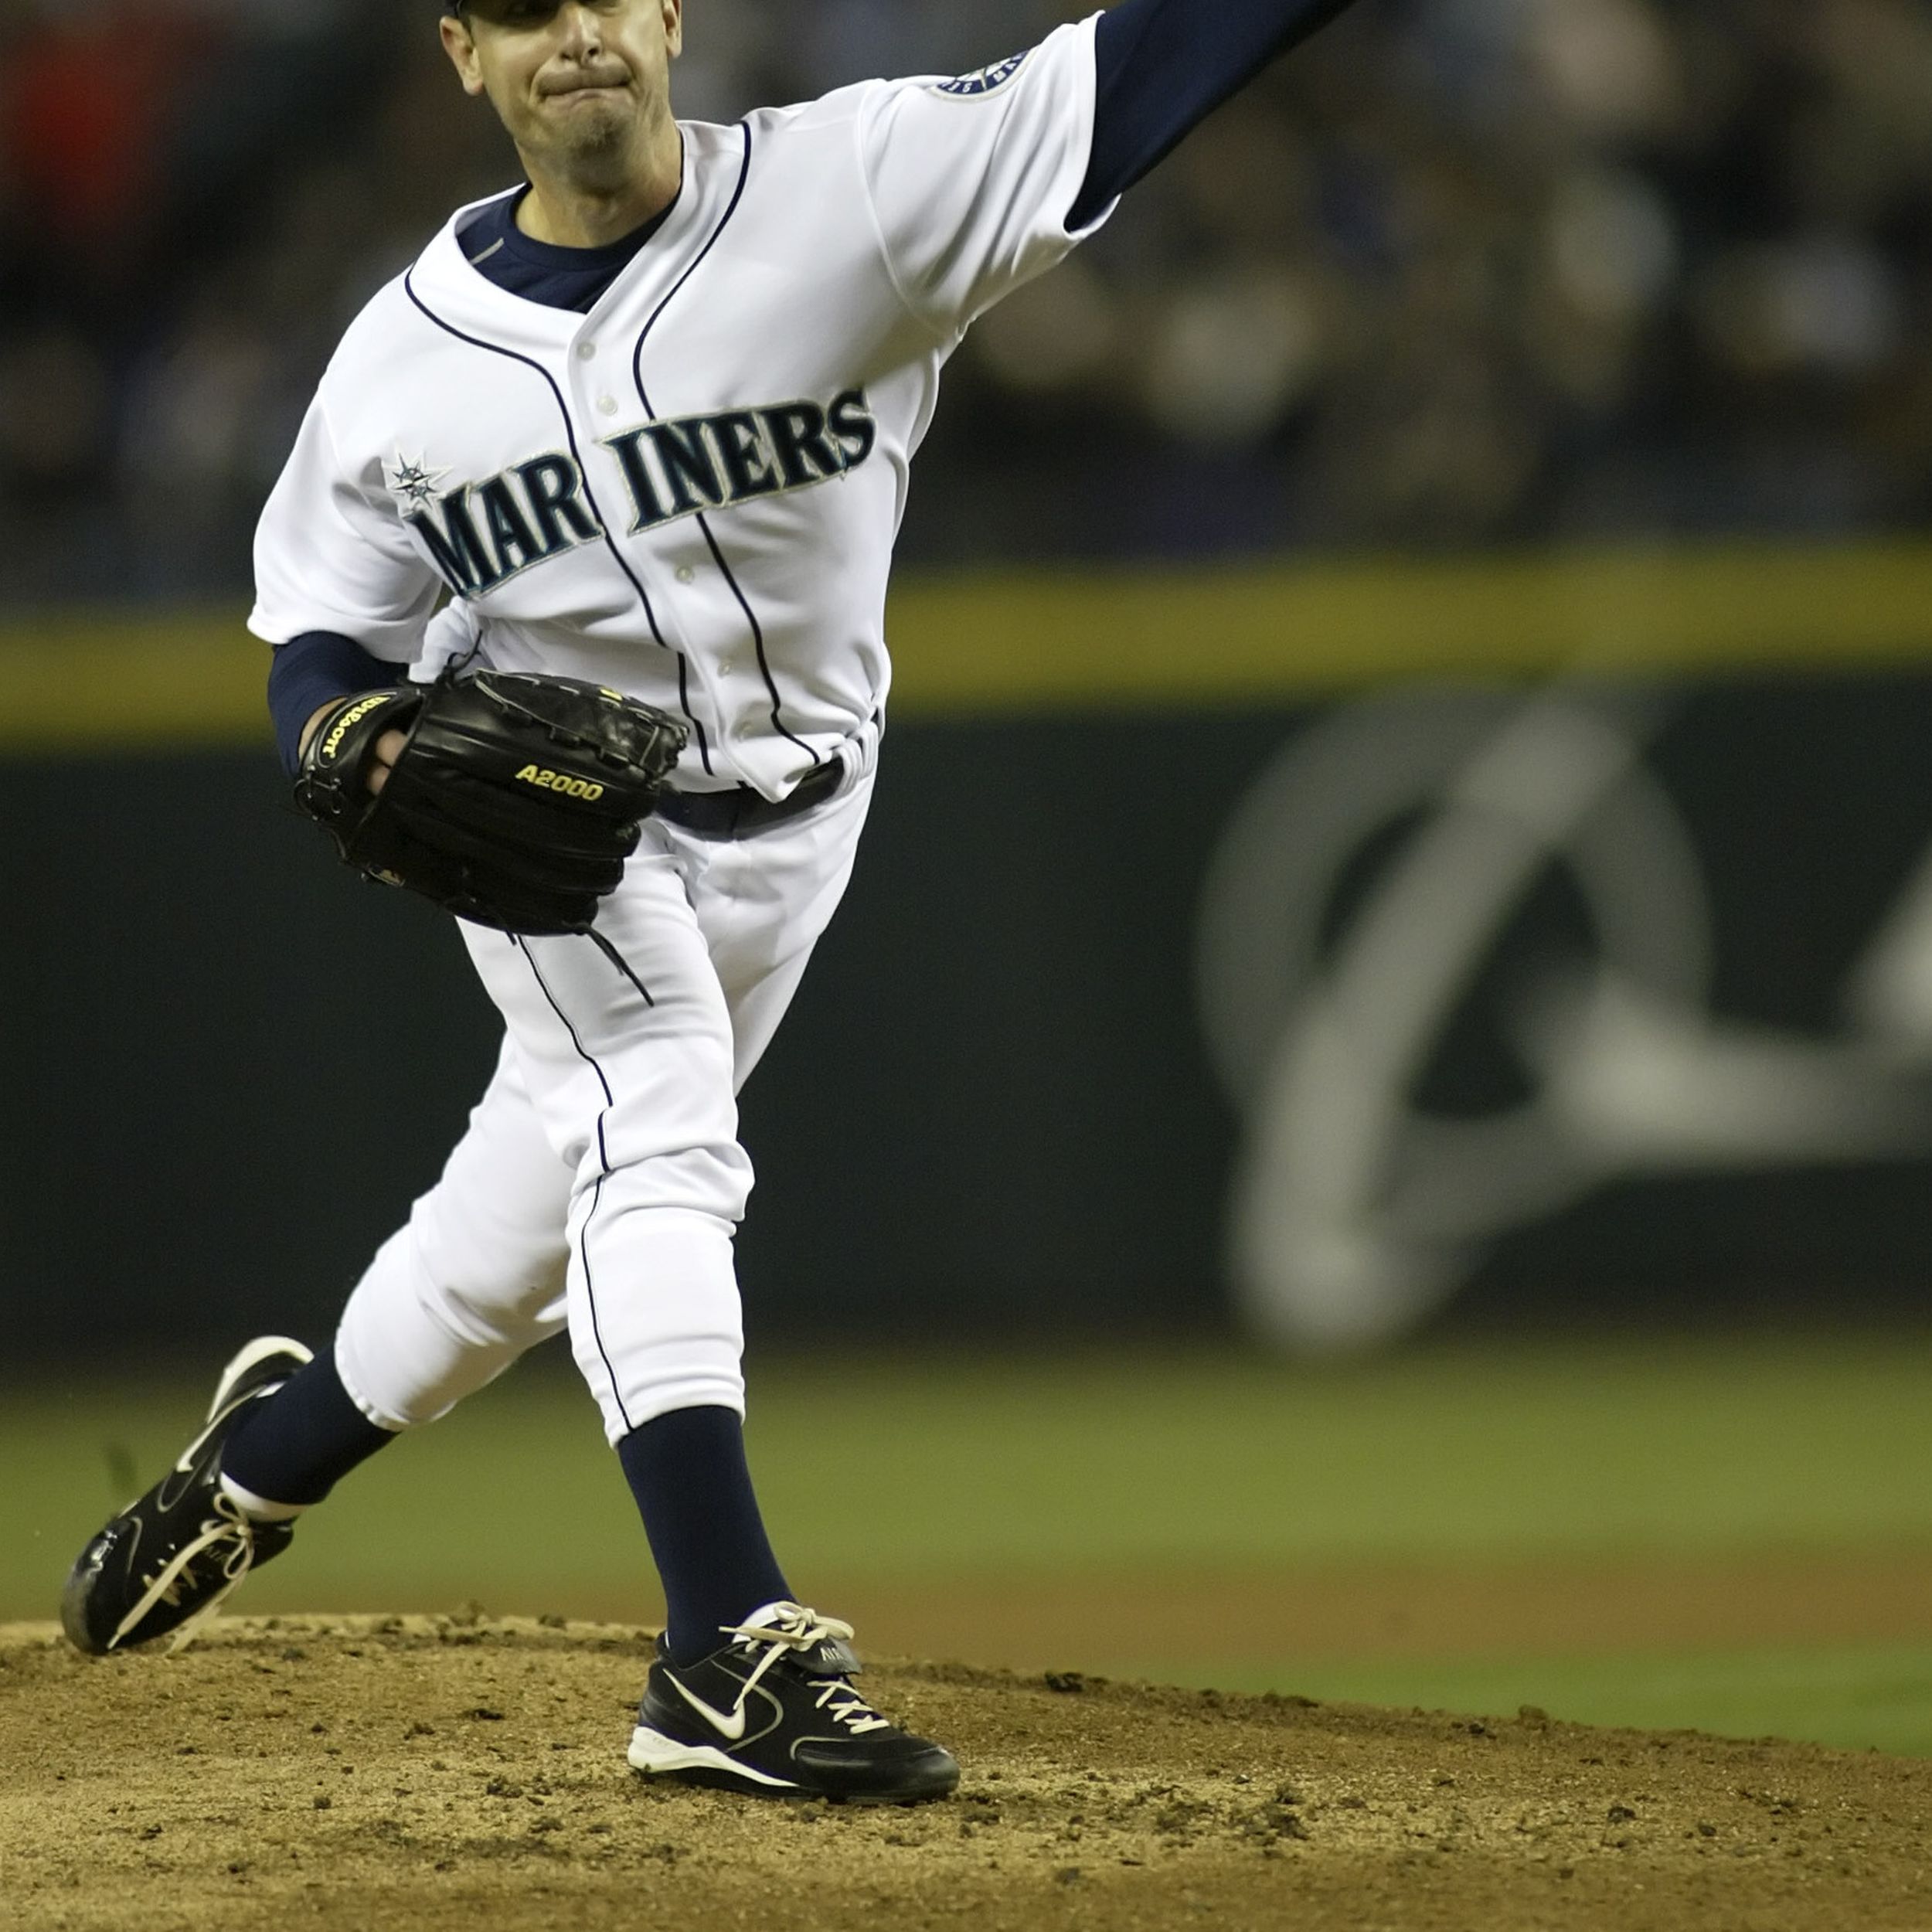 Q&A with Pitcher Jamie Moyer, 49, Who Is Trying To Catch On With